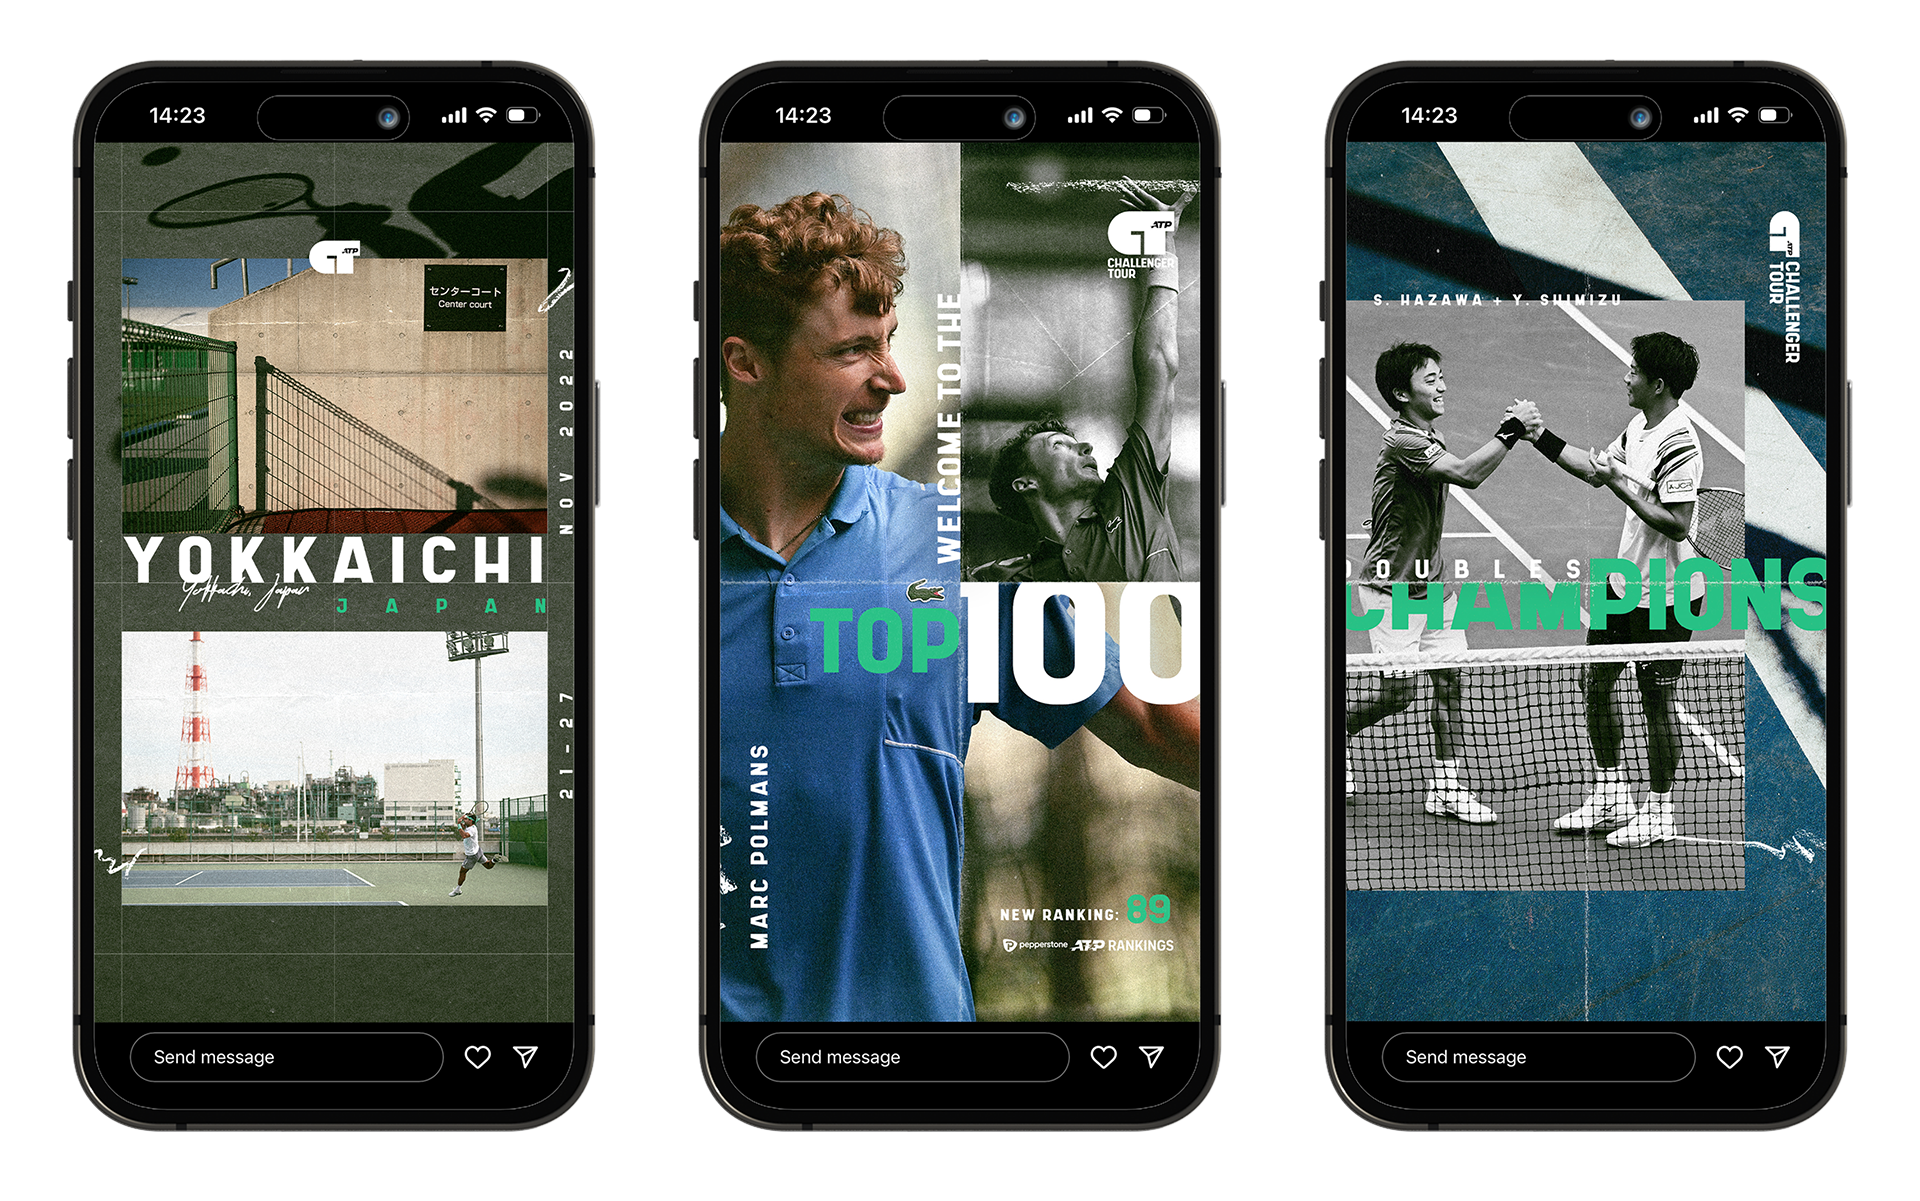 iPhone mock ups showing Yokaaichi image, Welcome to Top 100 graphic and doubles champions social posts